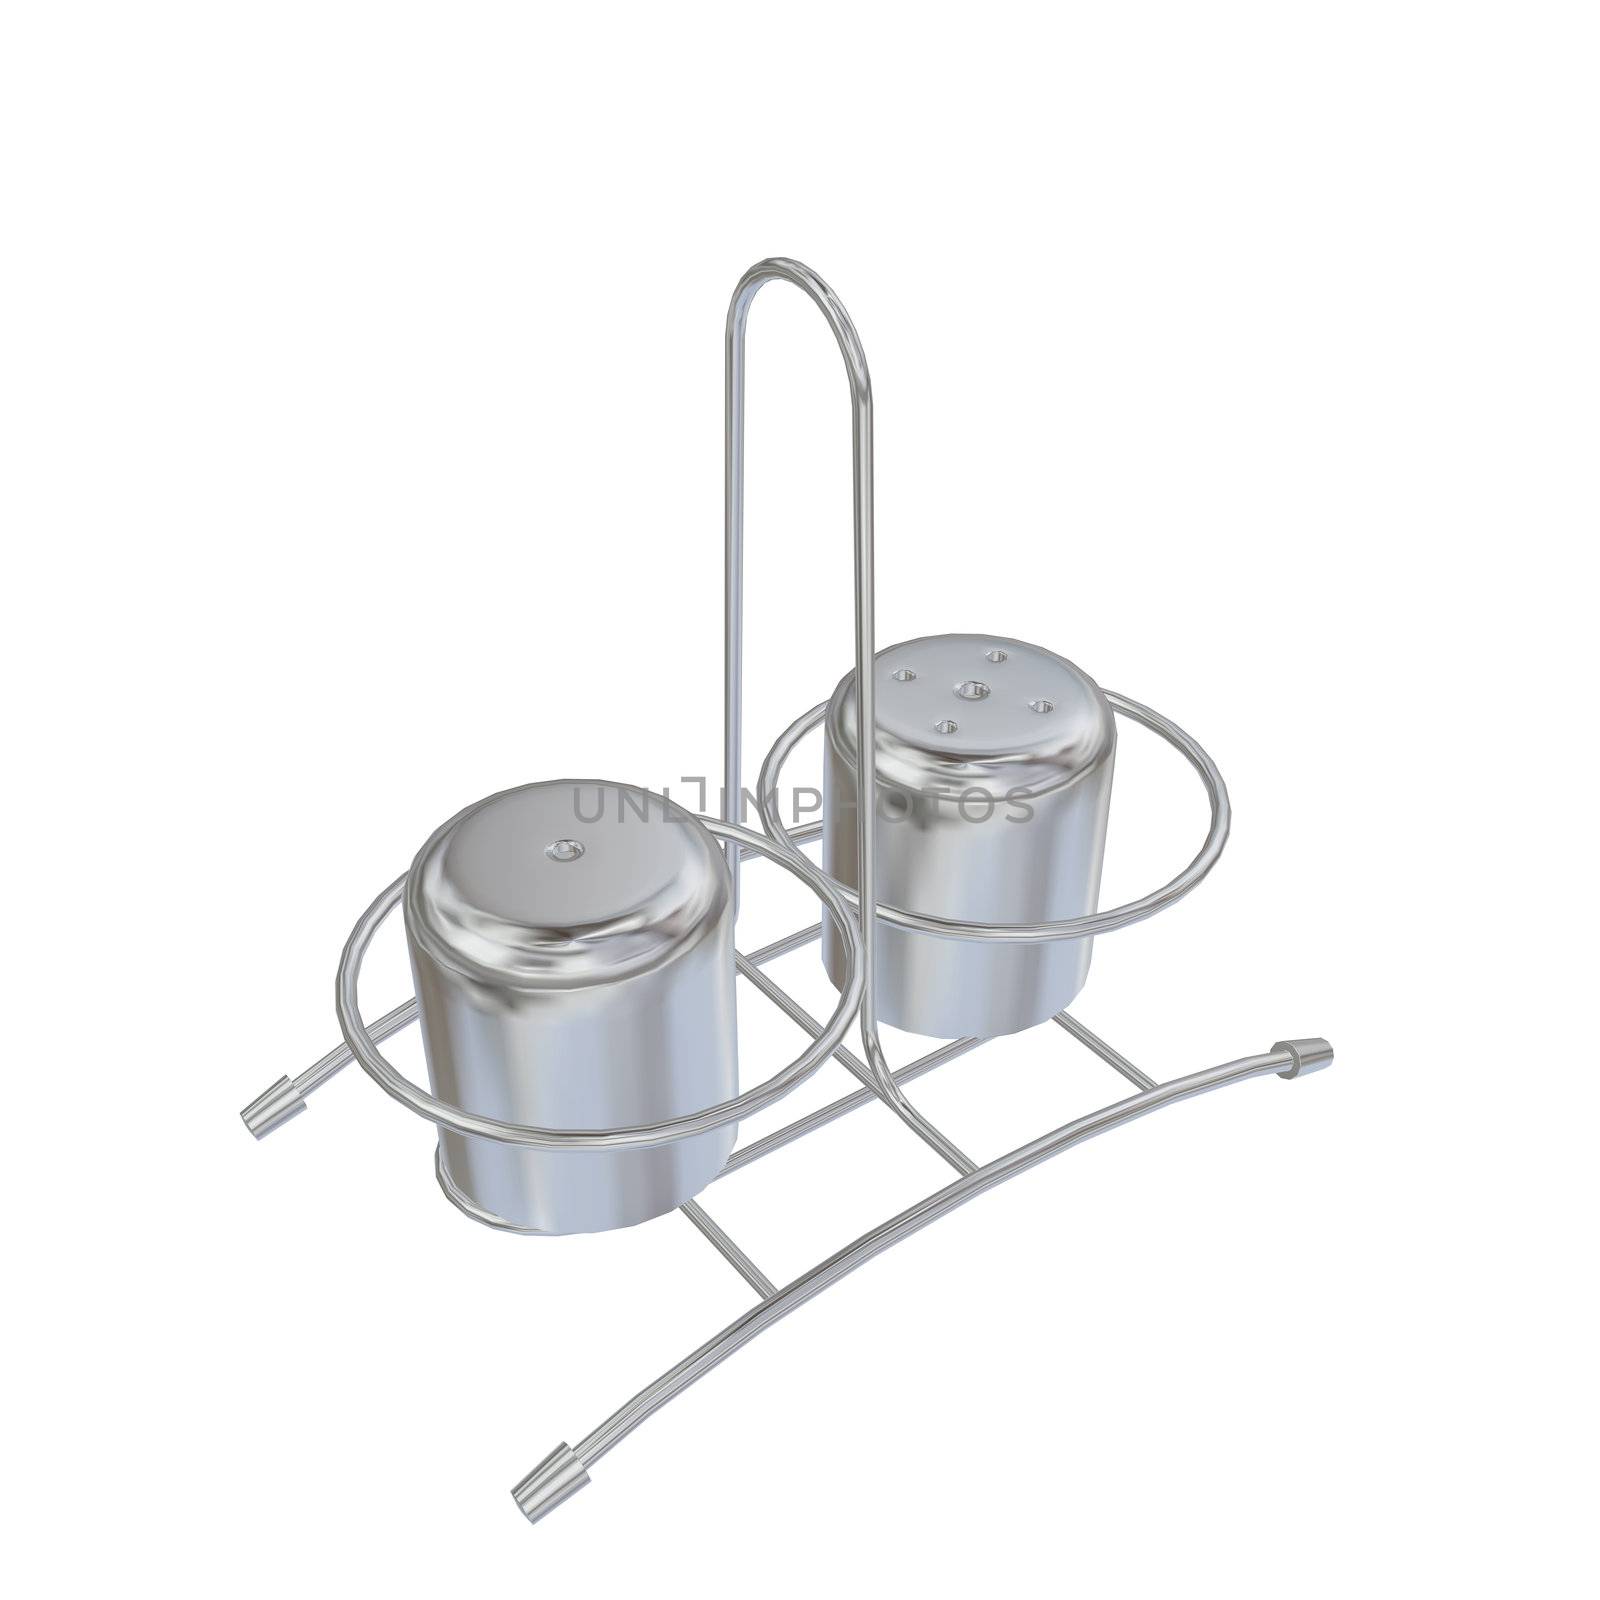 Stainless steel salt and pepper shakers with rack, 3D illustration, isolated against a white background